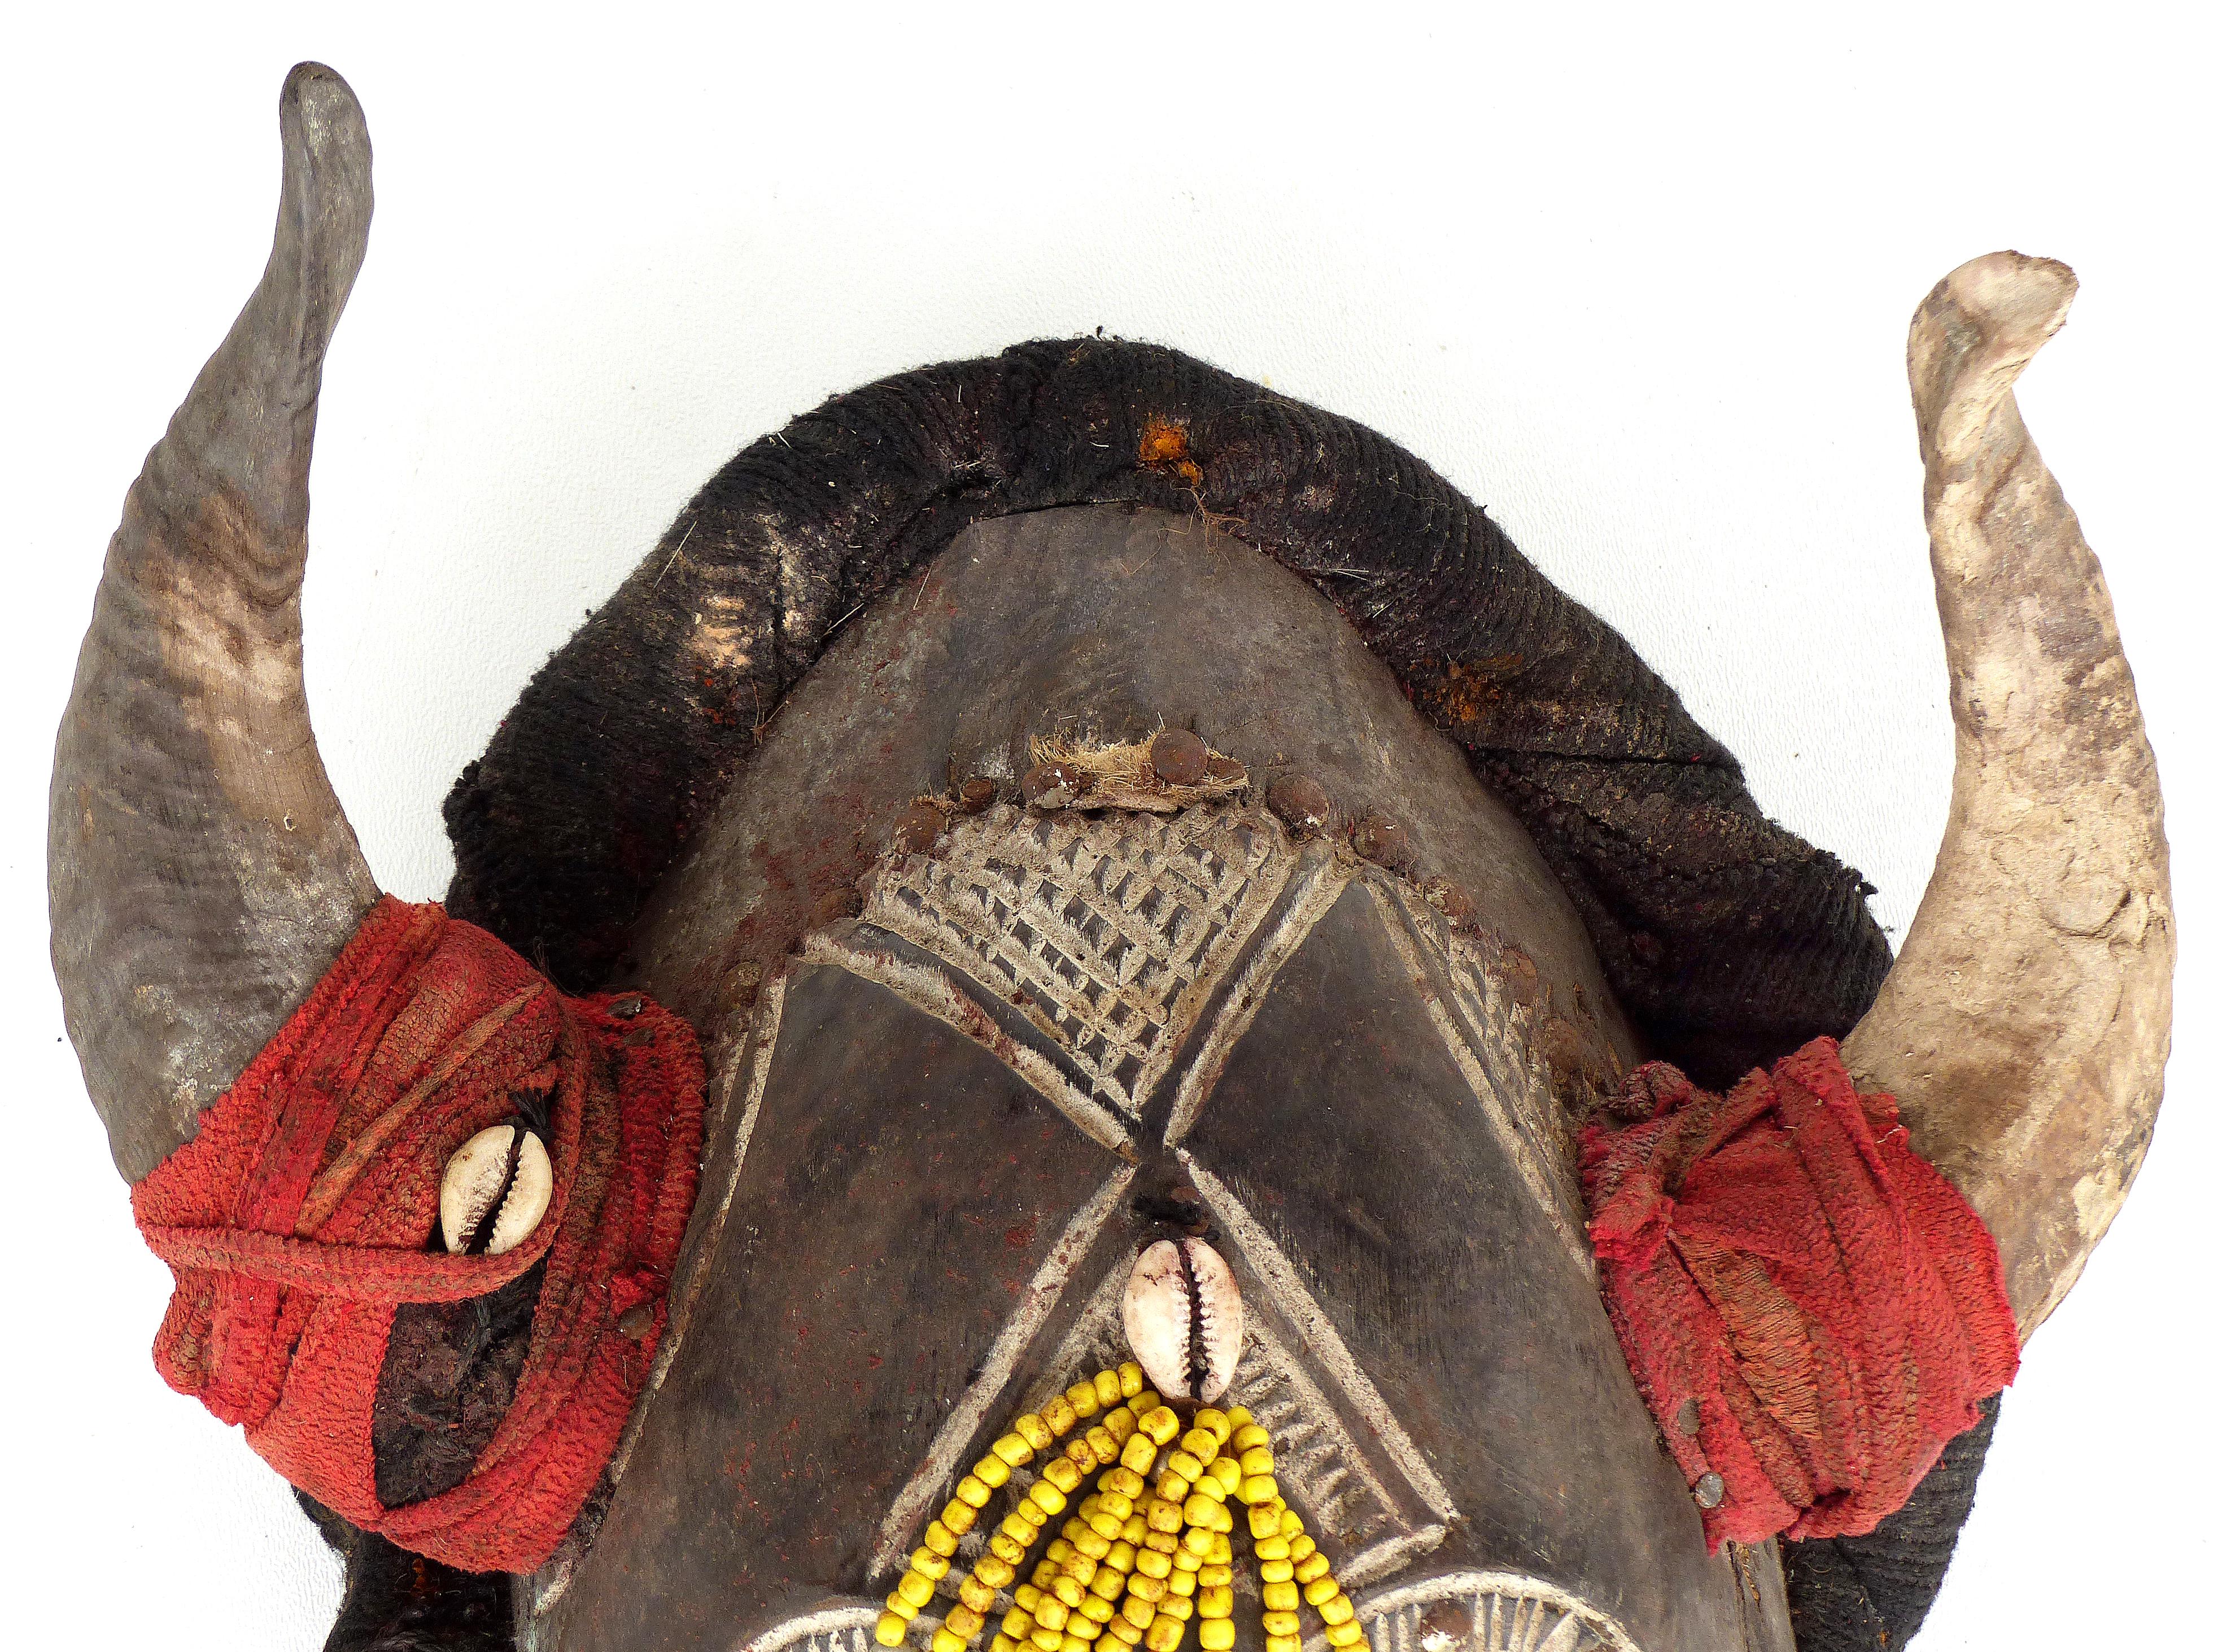 Bamileke Horned Tribal Mask from Cameroon, Africa

Offered for sale is a decorative carved mask from the Bamileke people of Cameroon, Africa. This interesting and unusual horned mask is embellished with beads, a bamboo beard, cowry shells, leather